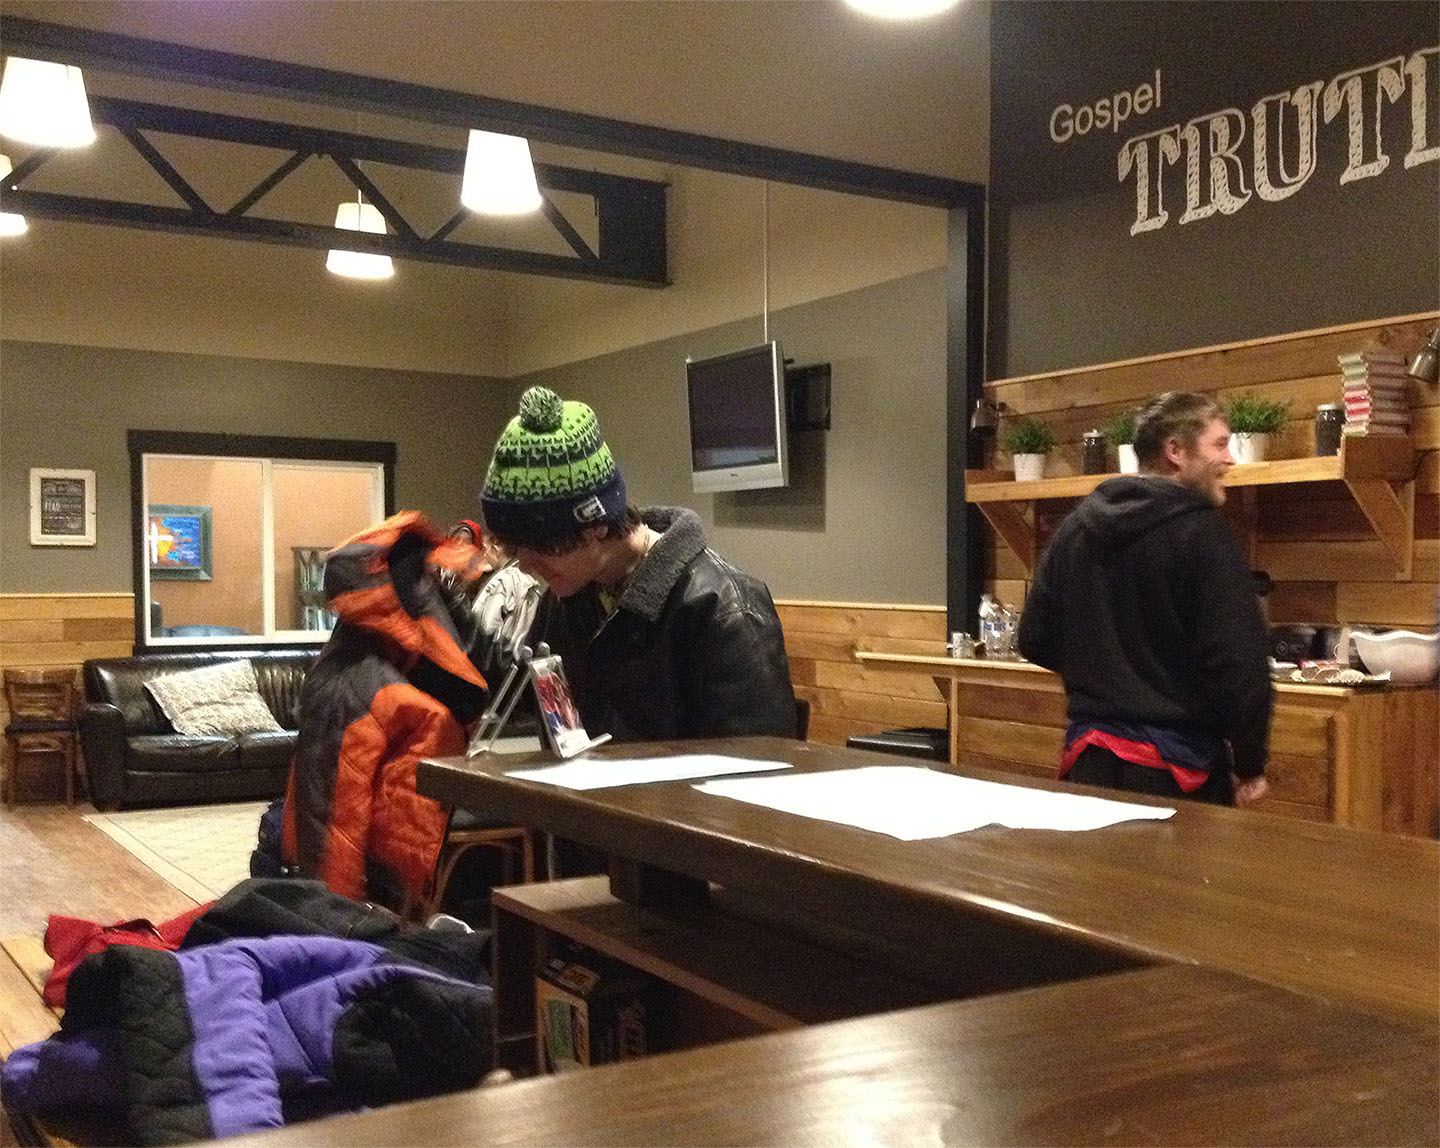 One night in Marysville’s emergency cold weather shelter